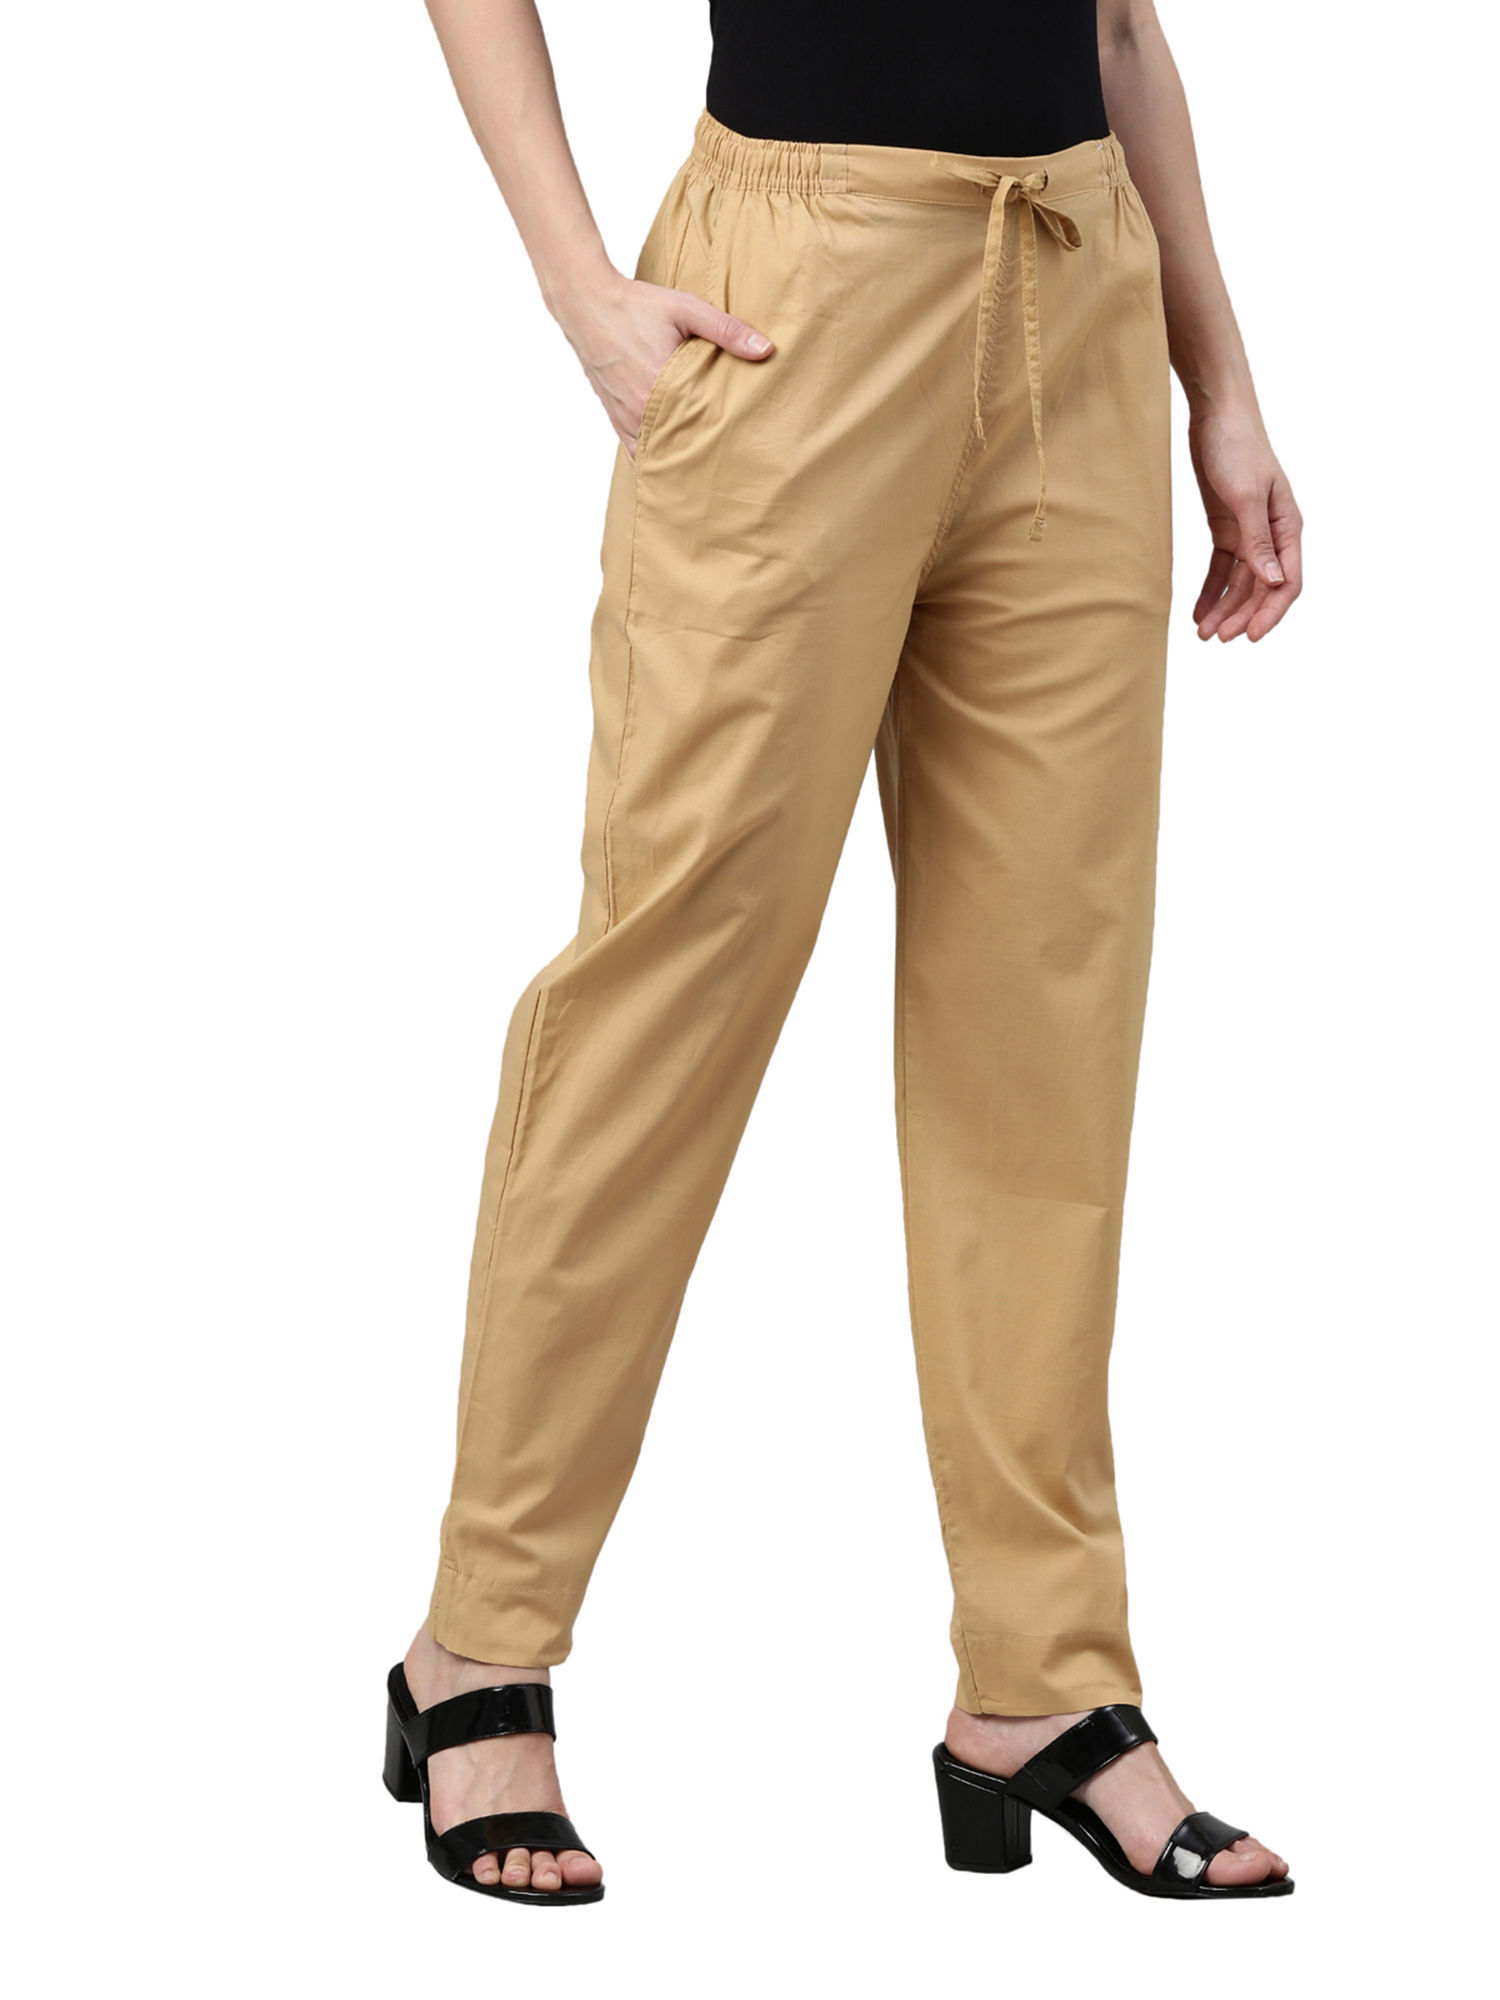 White Cotton Pants For Ladies at best price in Jaipur | ID: 23240036233